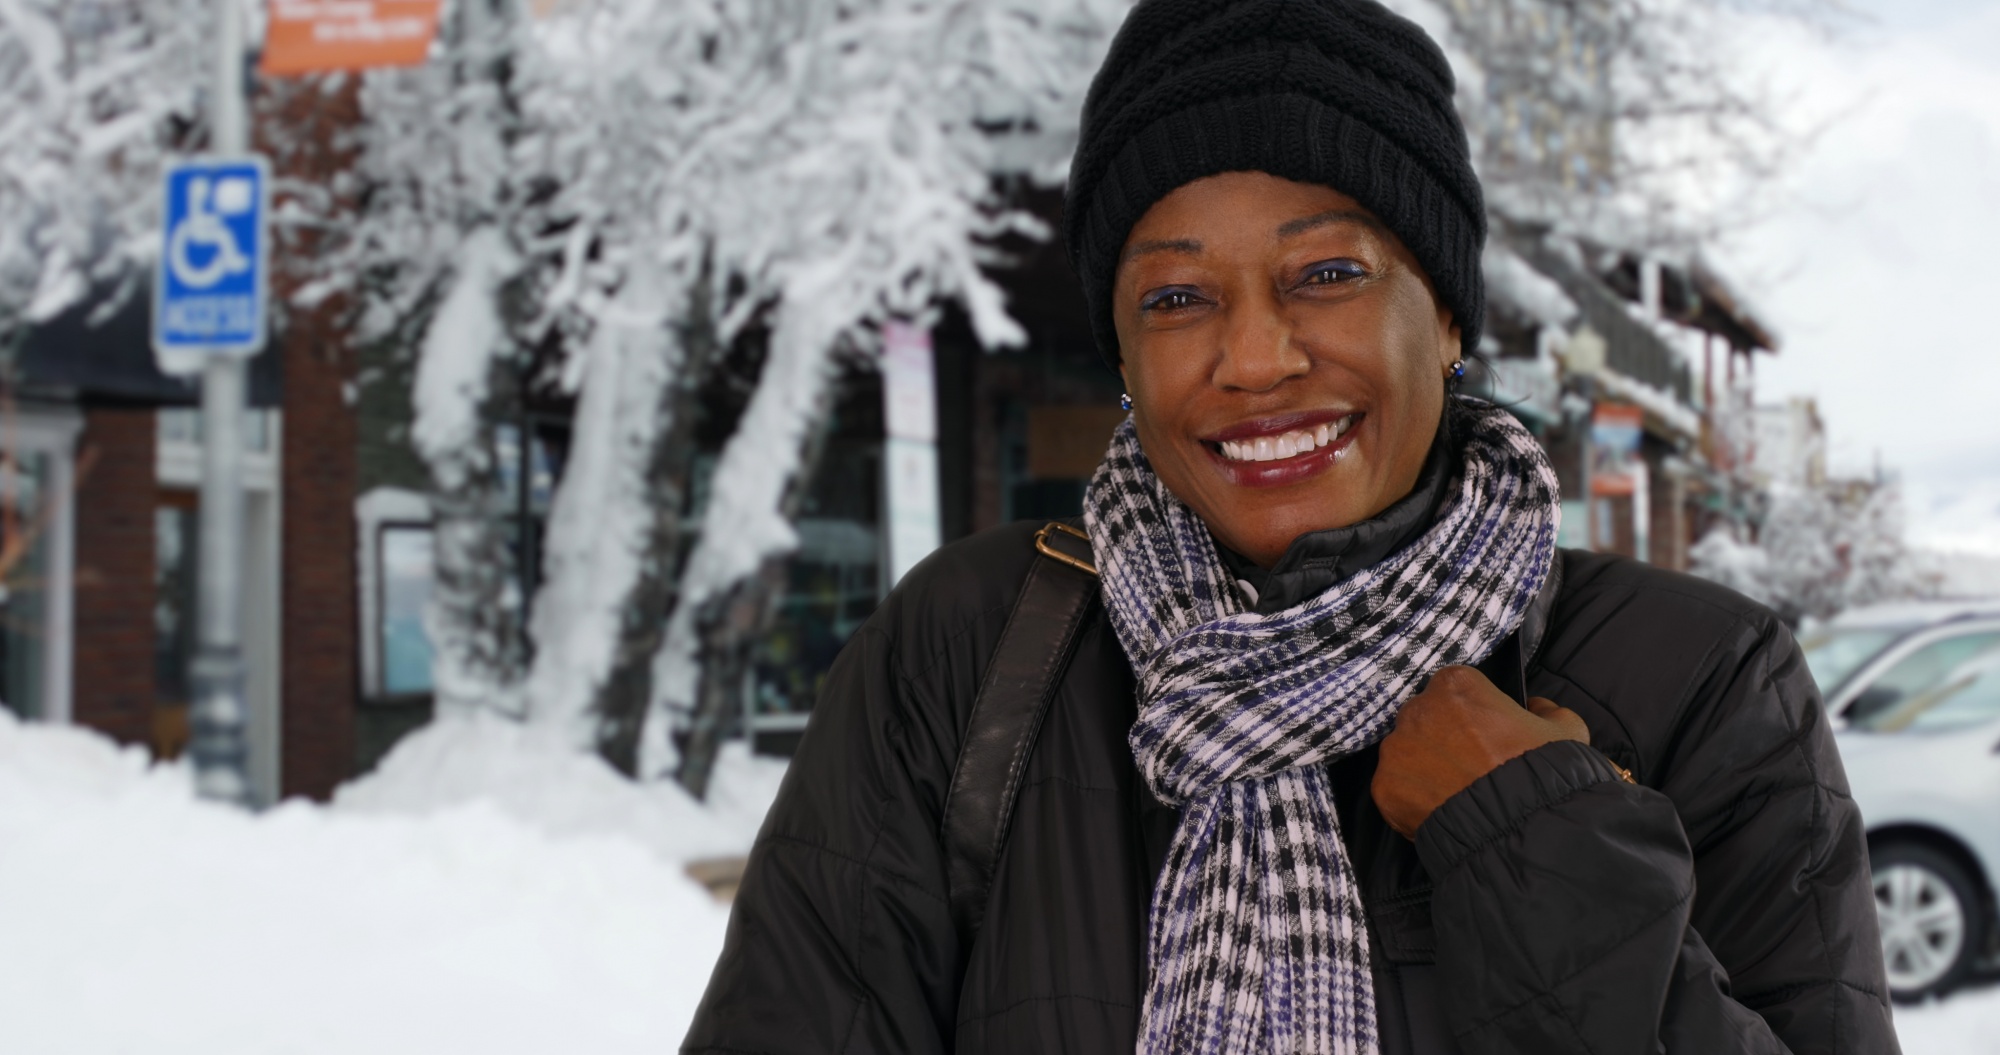 benefits of being outside during winter, Black woman in a black hat and jacket on a snowy sidewalk